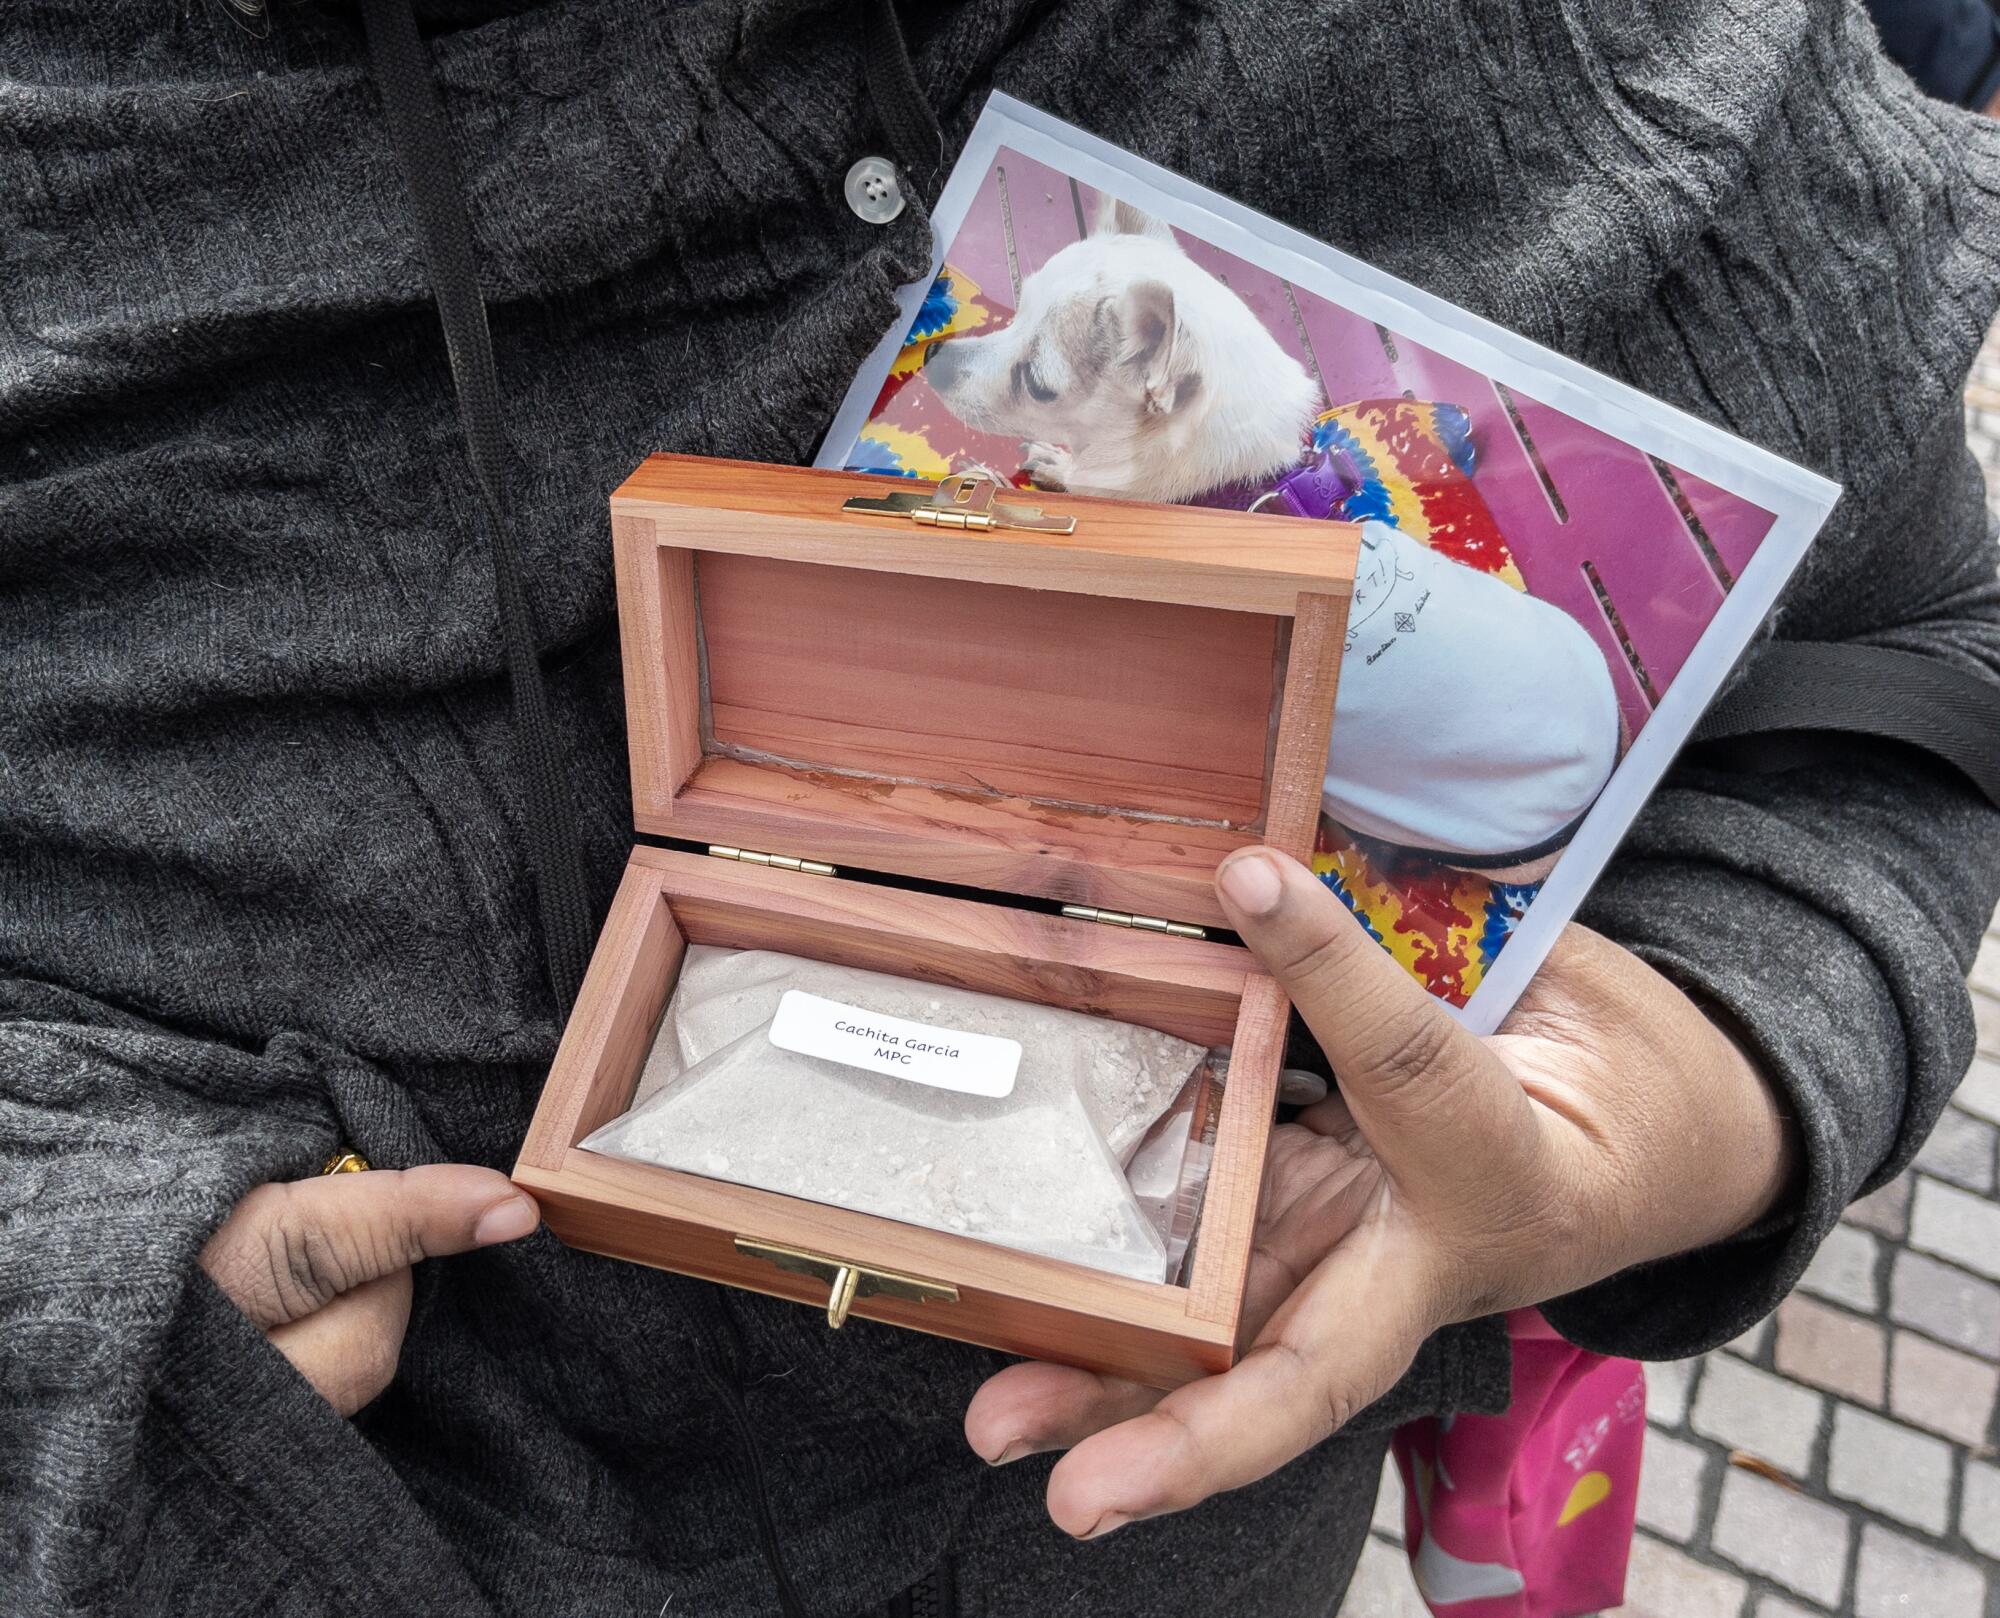 Cecilia Garcia brought the ashes of her dog Cachita to be blessed.